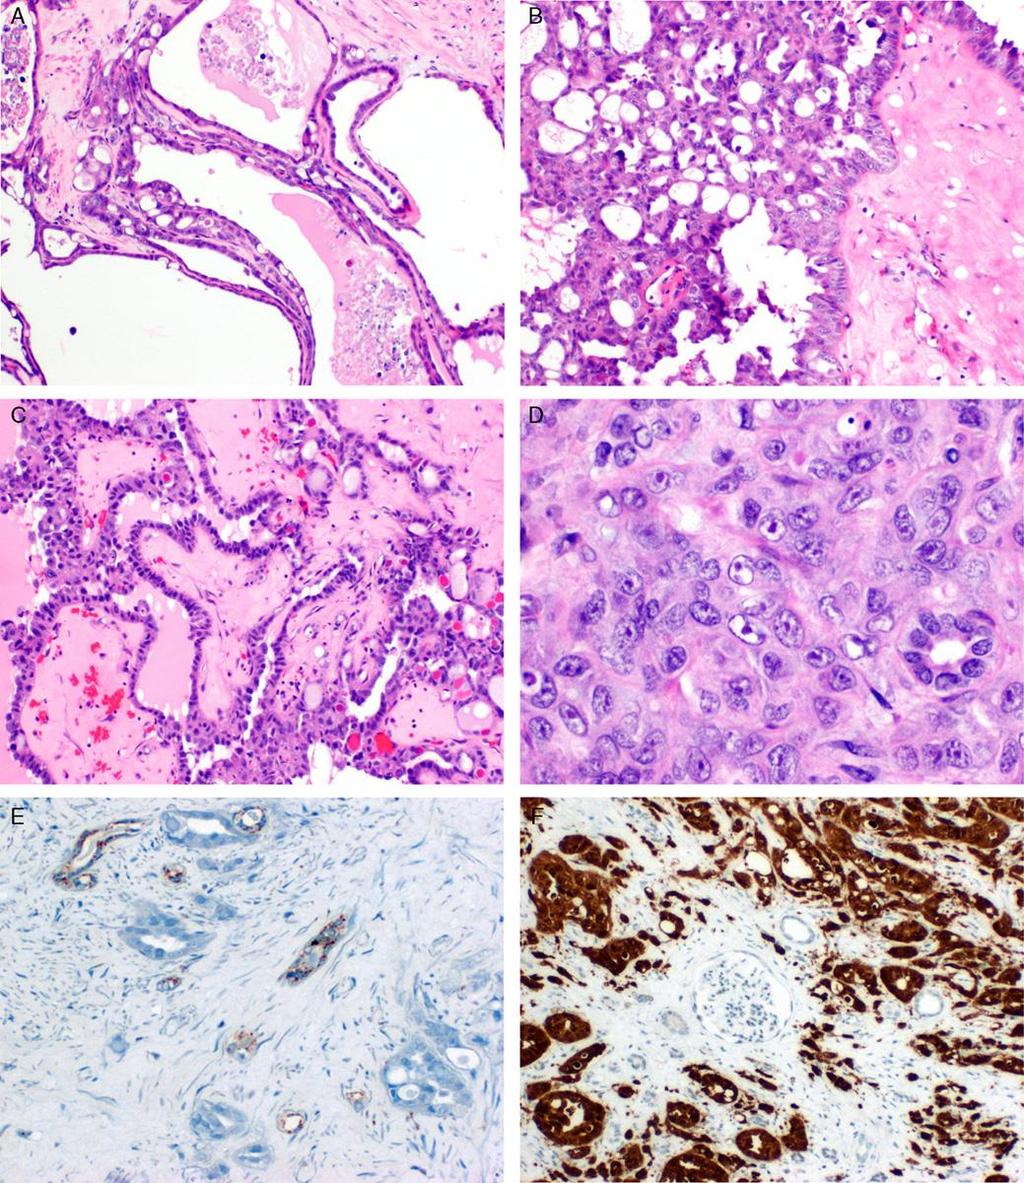 Tubulocystic carcinoma with poorly differentiated